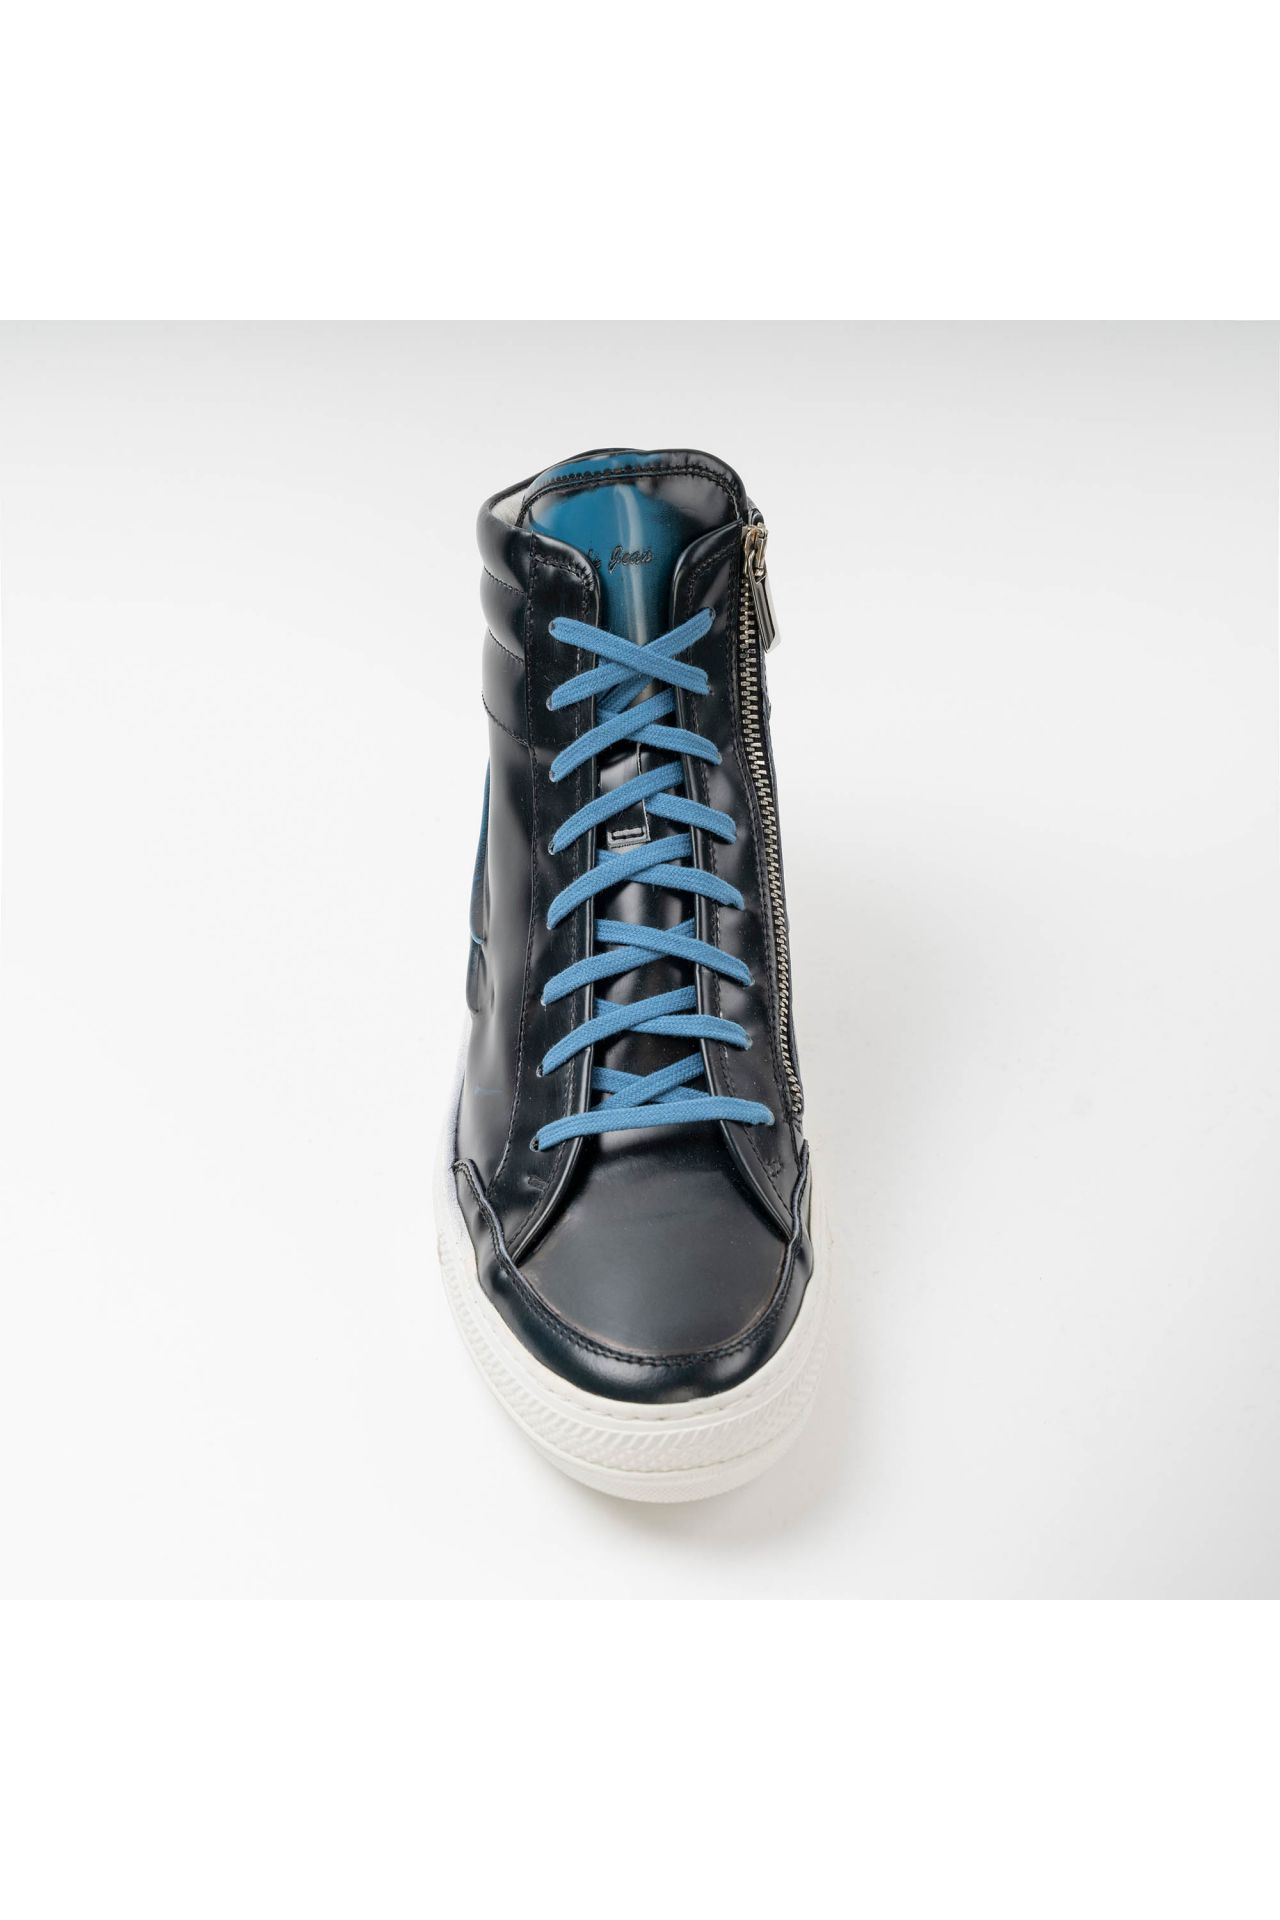 MENS HIGH TOP LAMINATED LEATHER SNEAKERS IN DARK BLUE